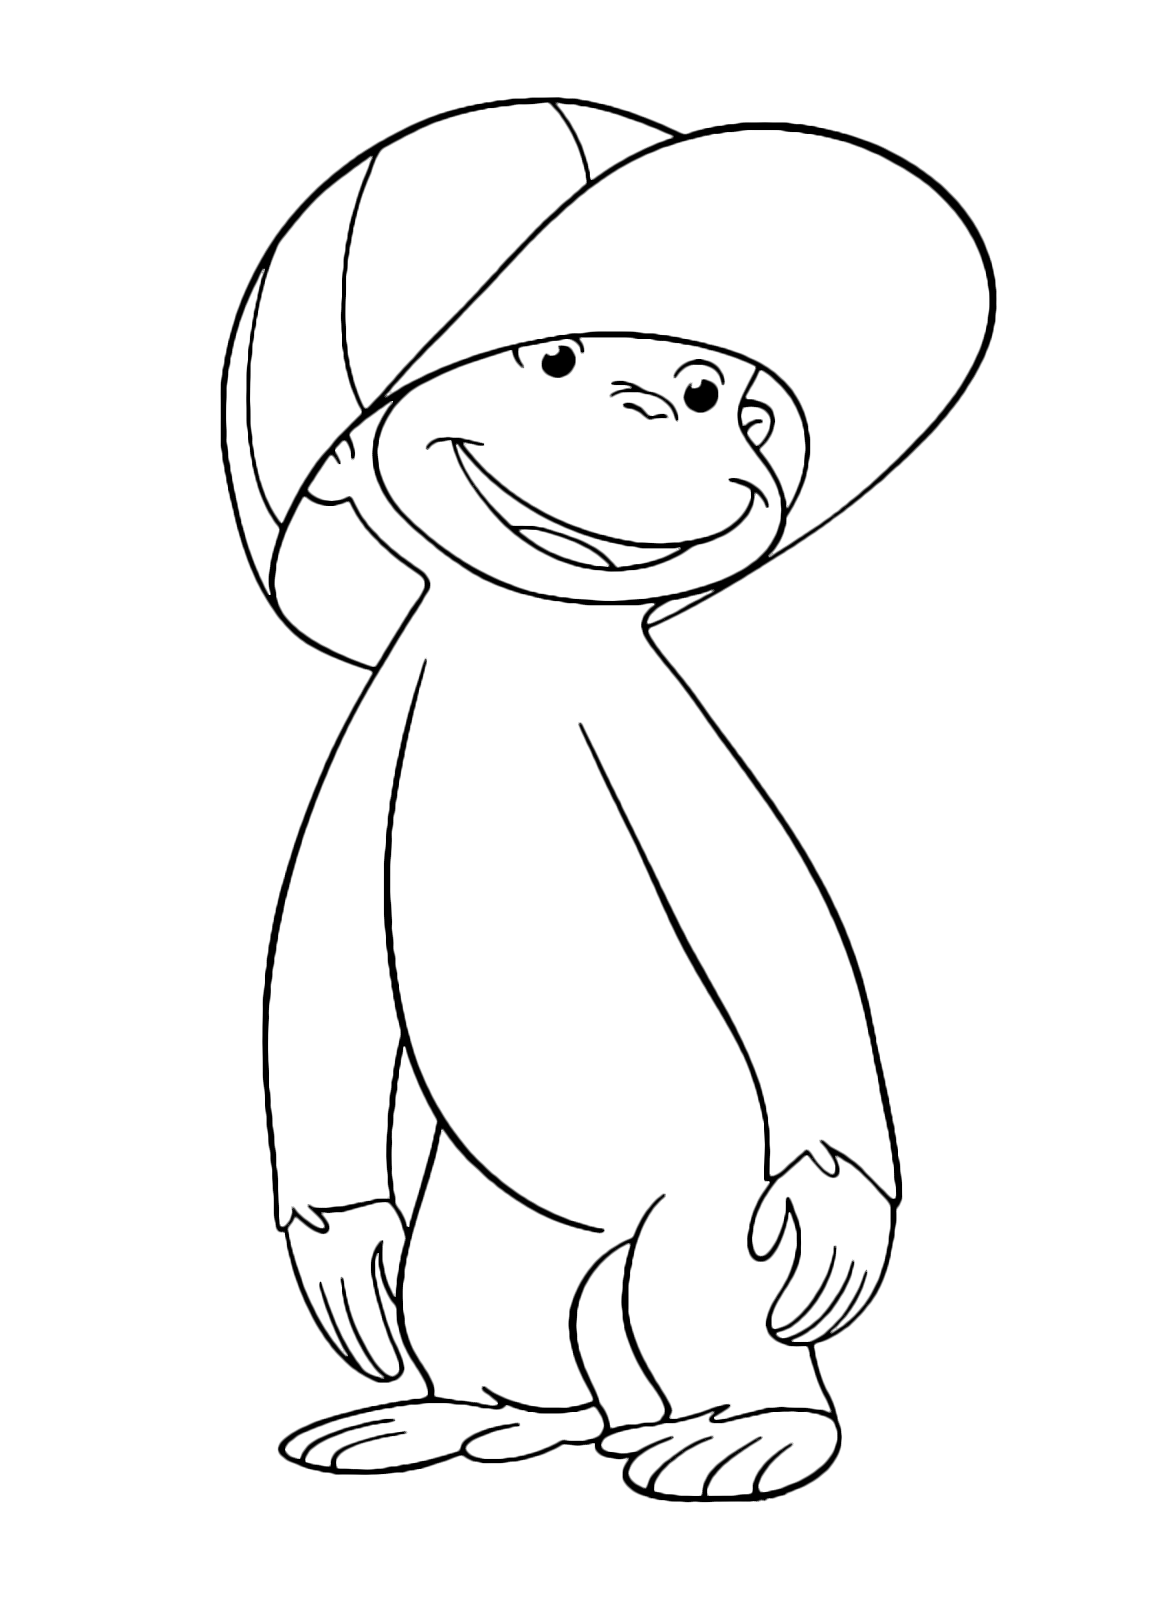 Curious George - George happy with a hat on his head